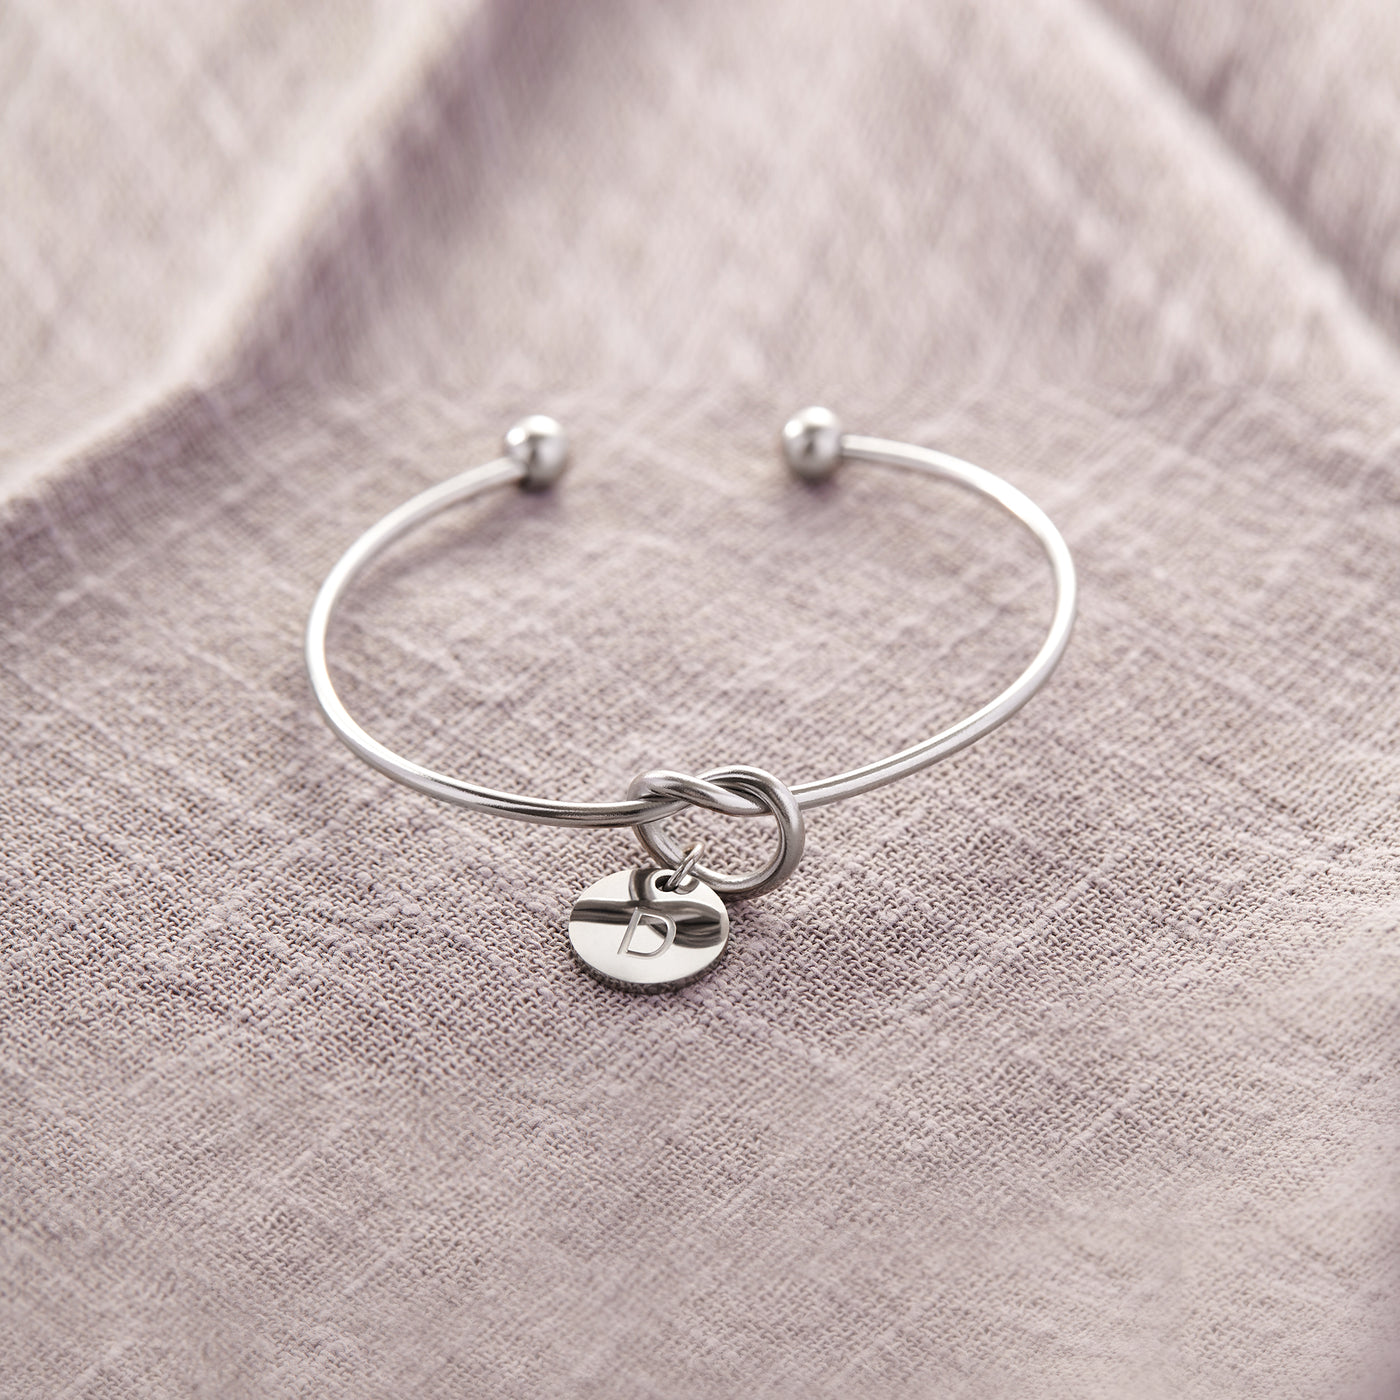 PERSONALIZED DOUBLE INITIAL BANGLE